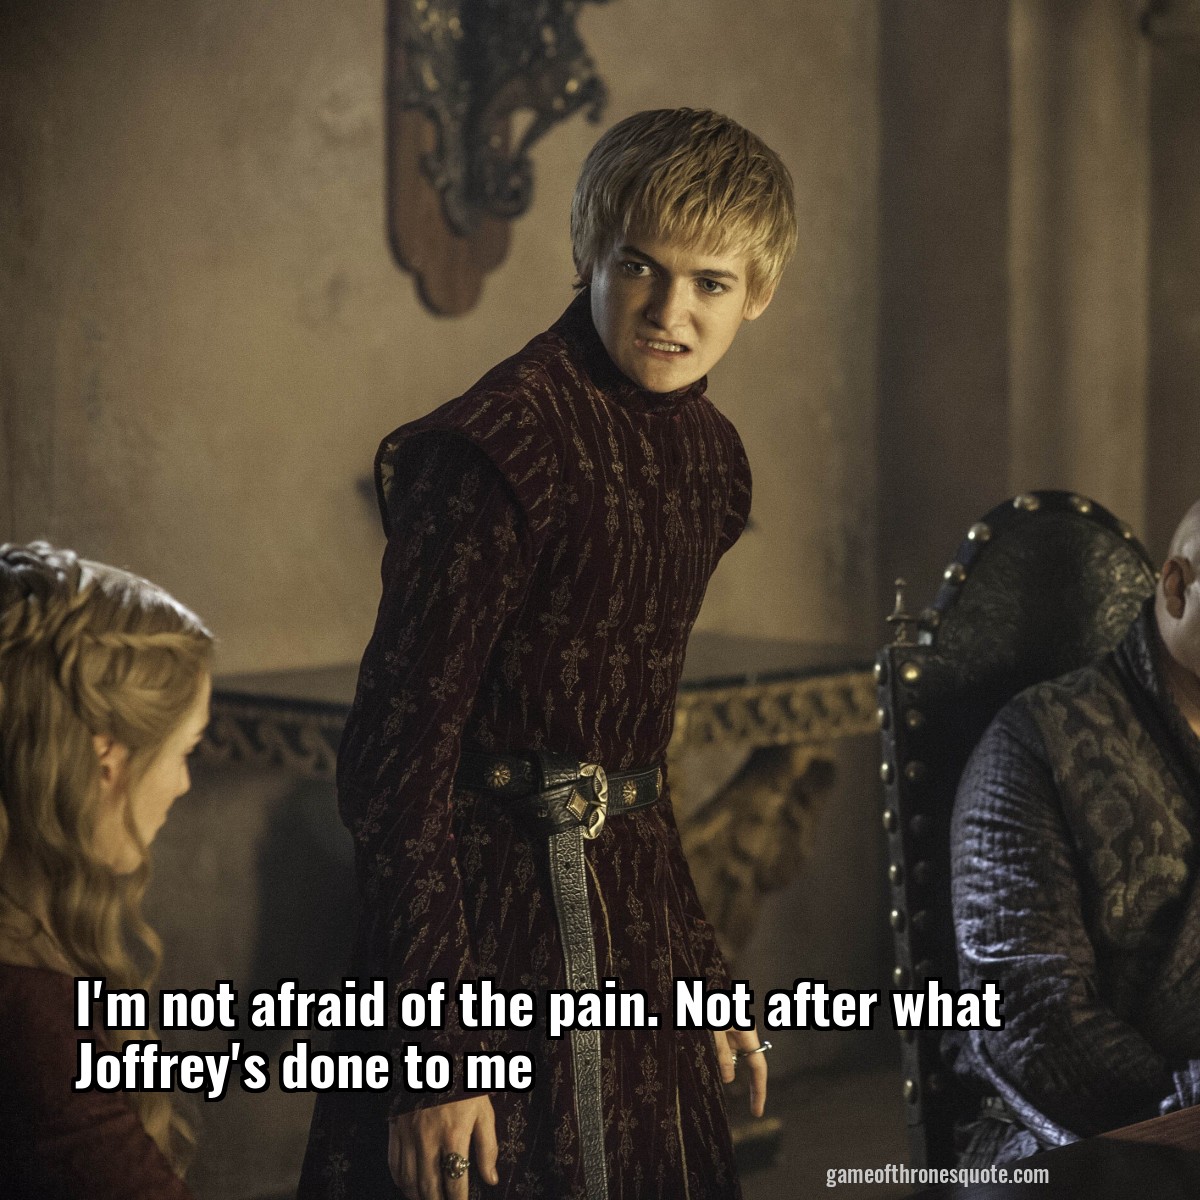 I'm not afraid of the pain. Not after what Joffrey's done to me